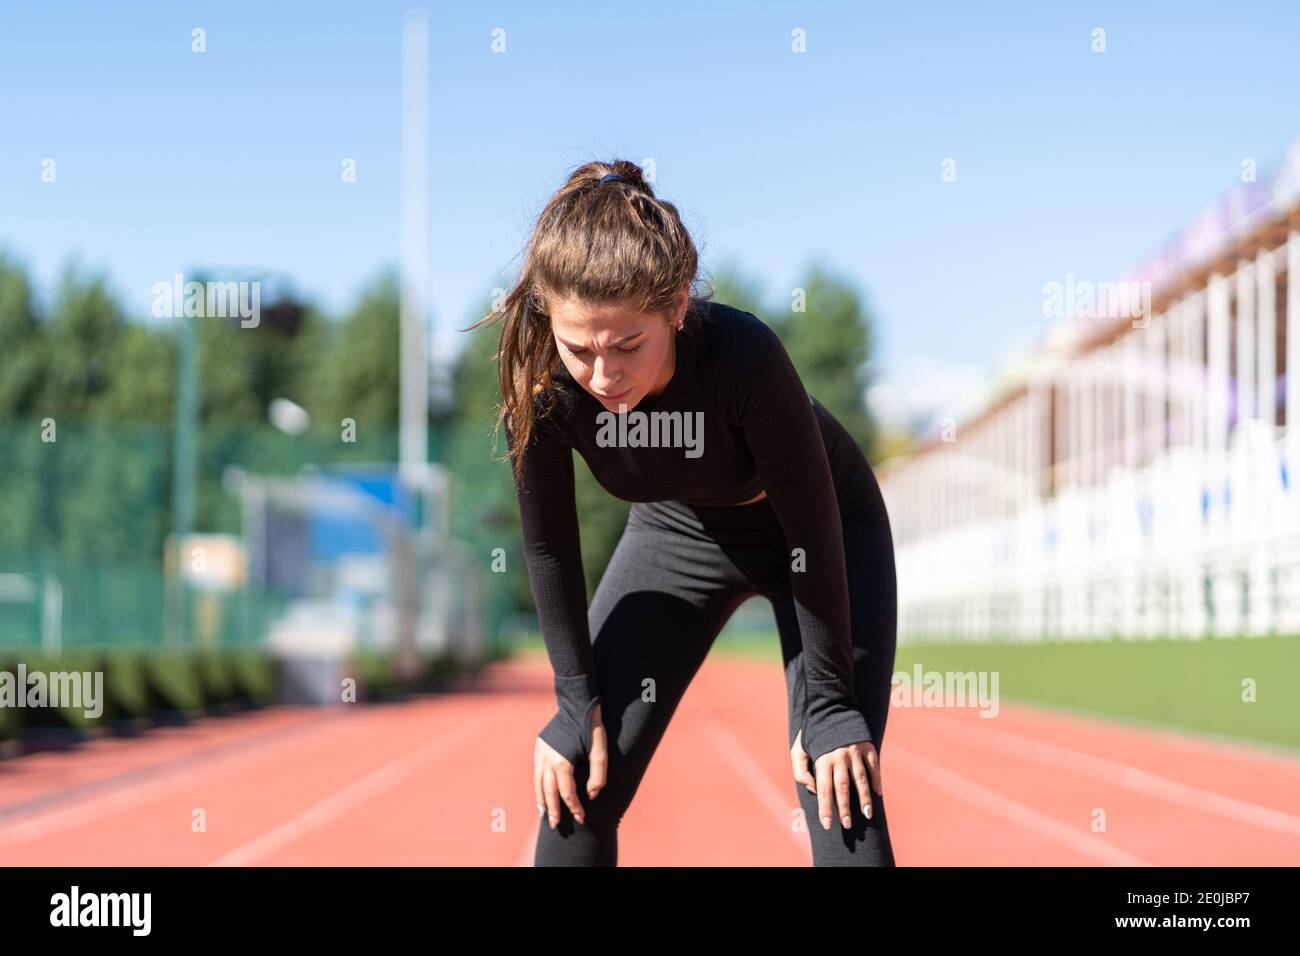 Tired sporty fitness woman in sportswear exhausted breathing after running on a treadmill rubber stadium, taking a break during training, outdoors Stock Photo